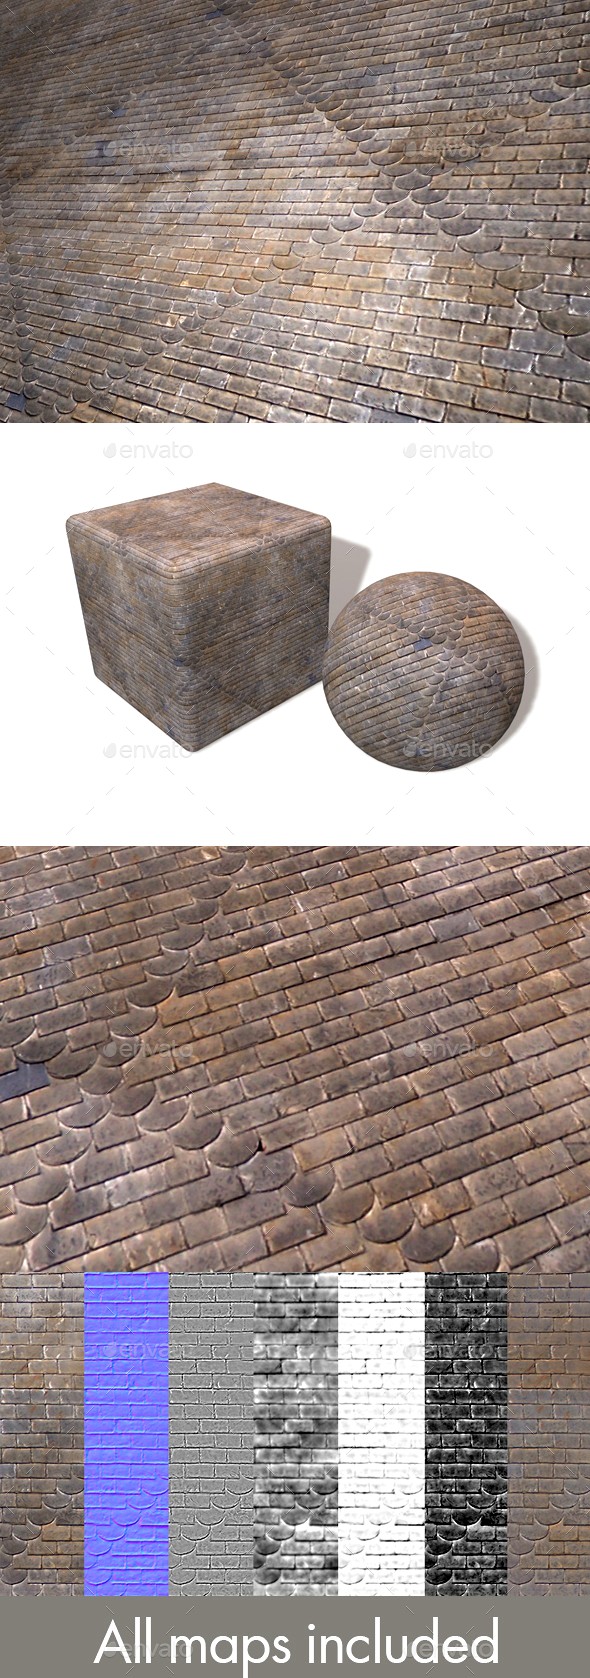 Patterned Roof Tiles Seamless Texture